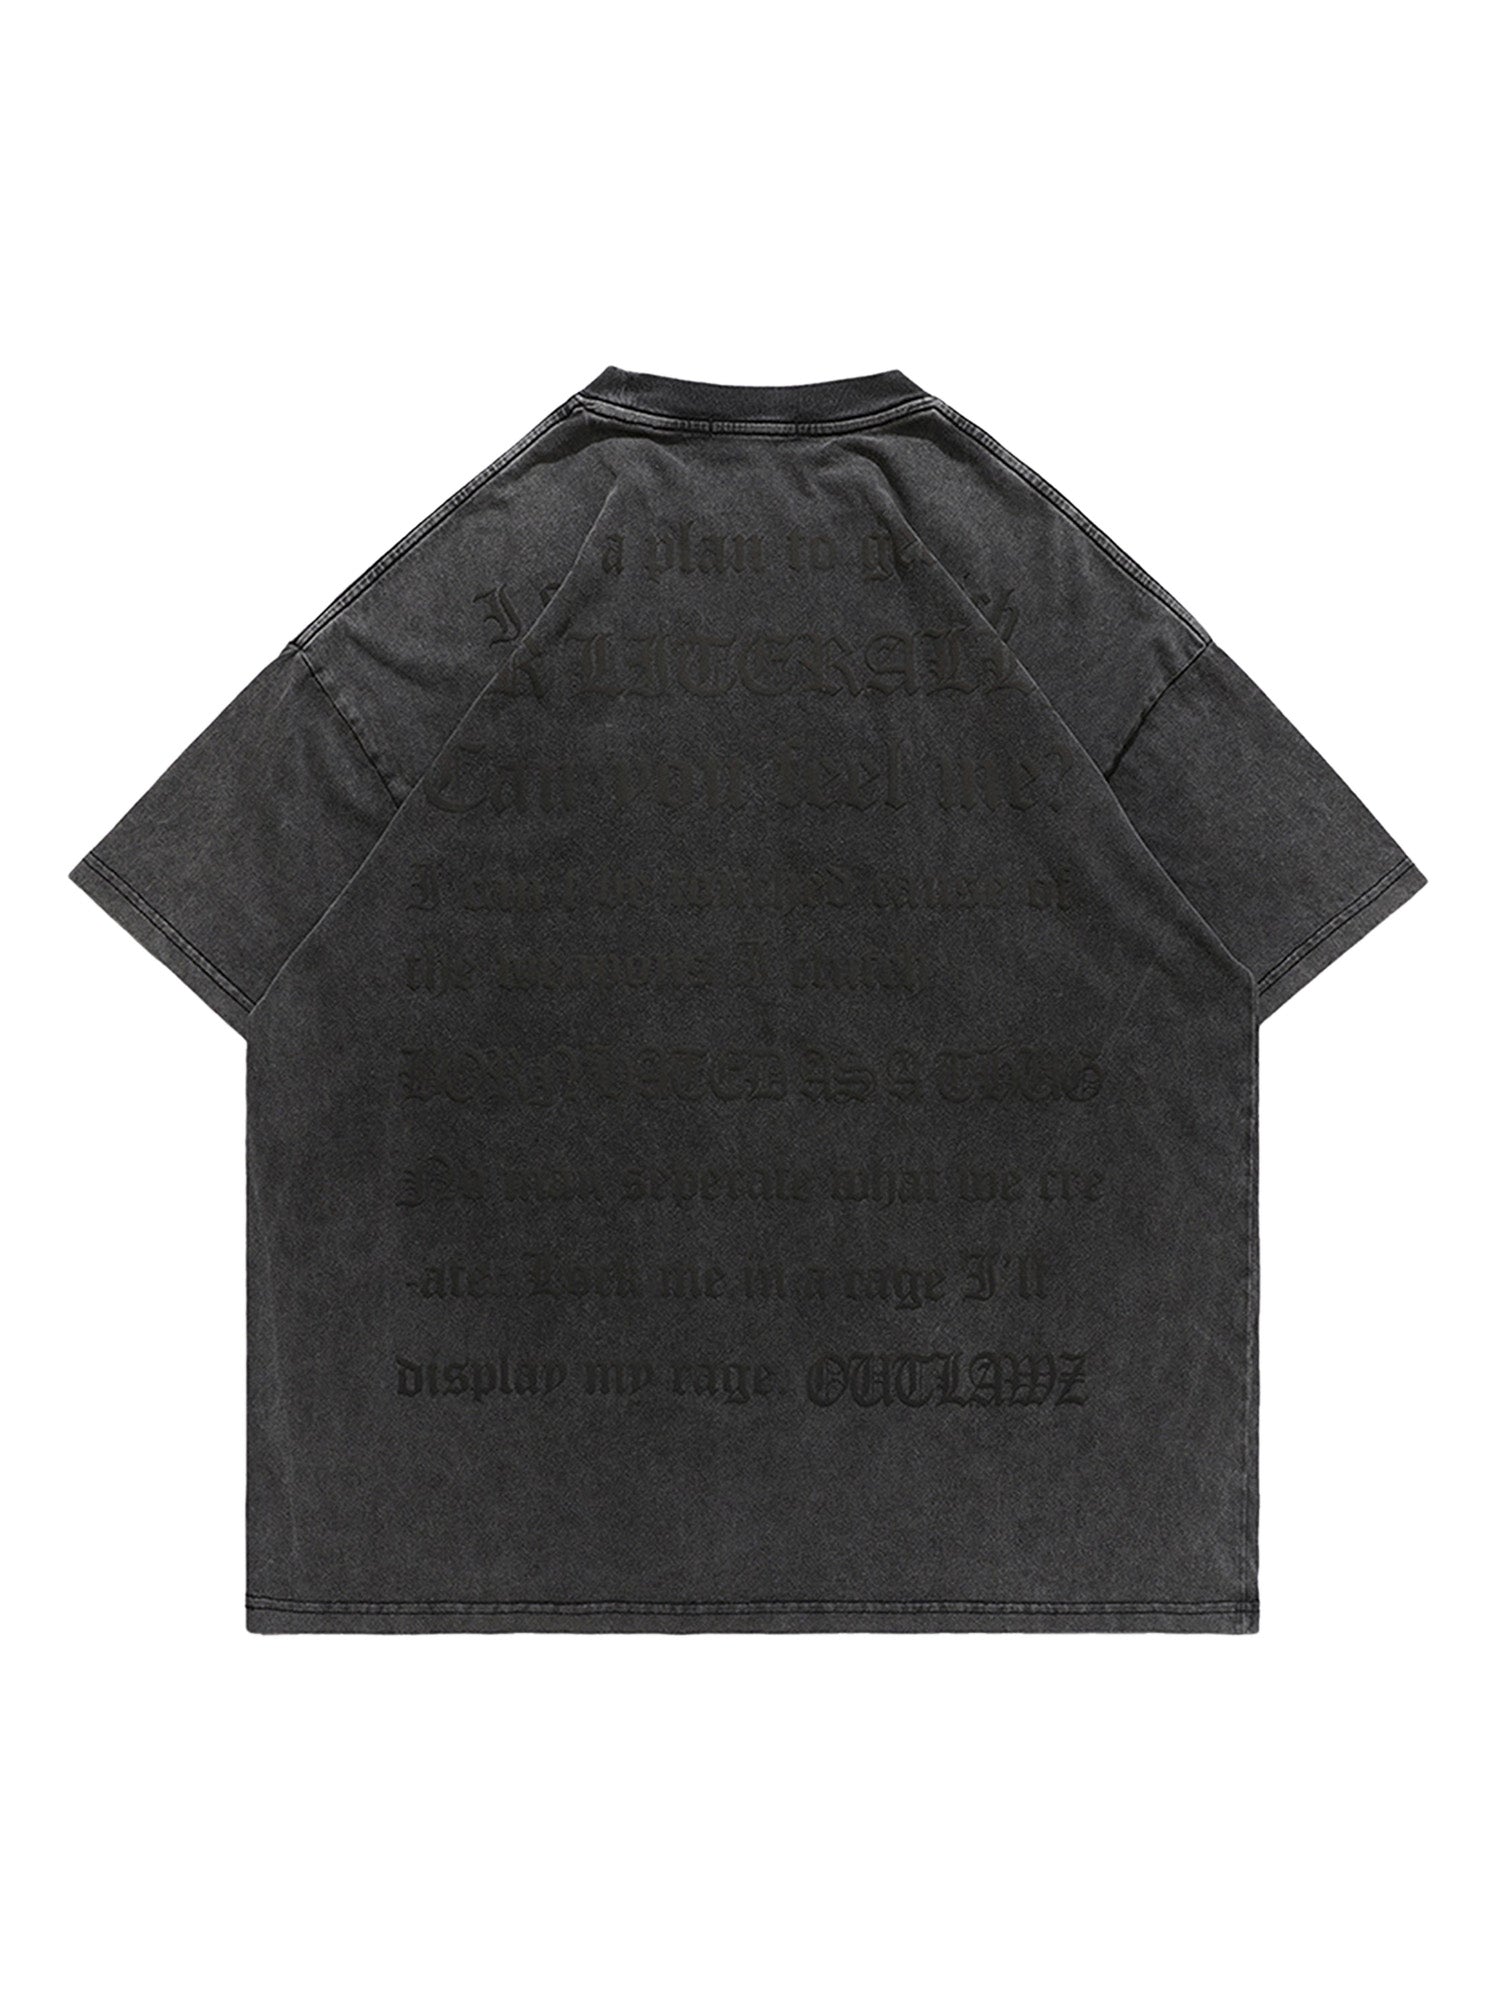 Thesupermade Washed Letter Print T-shirt